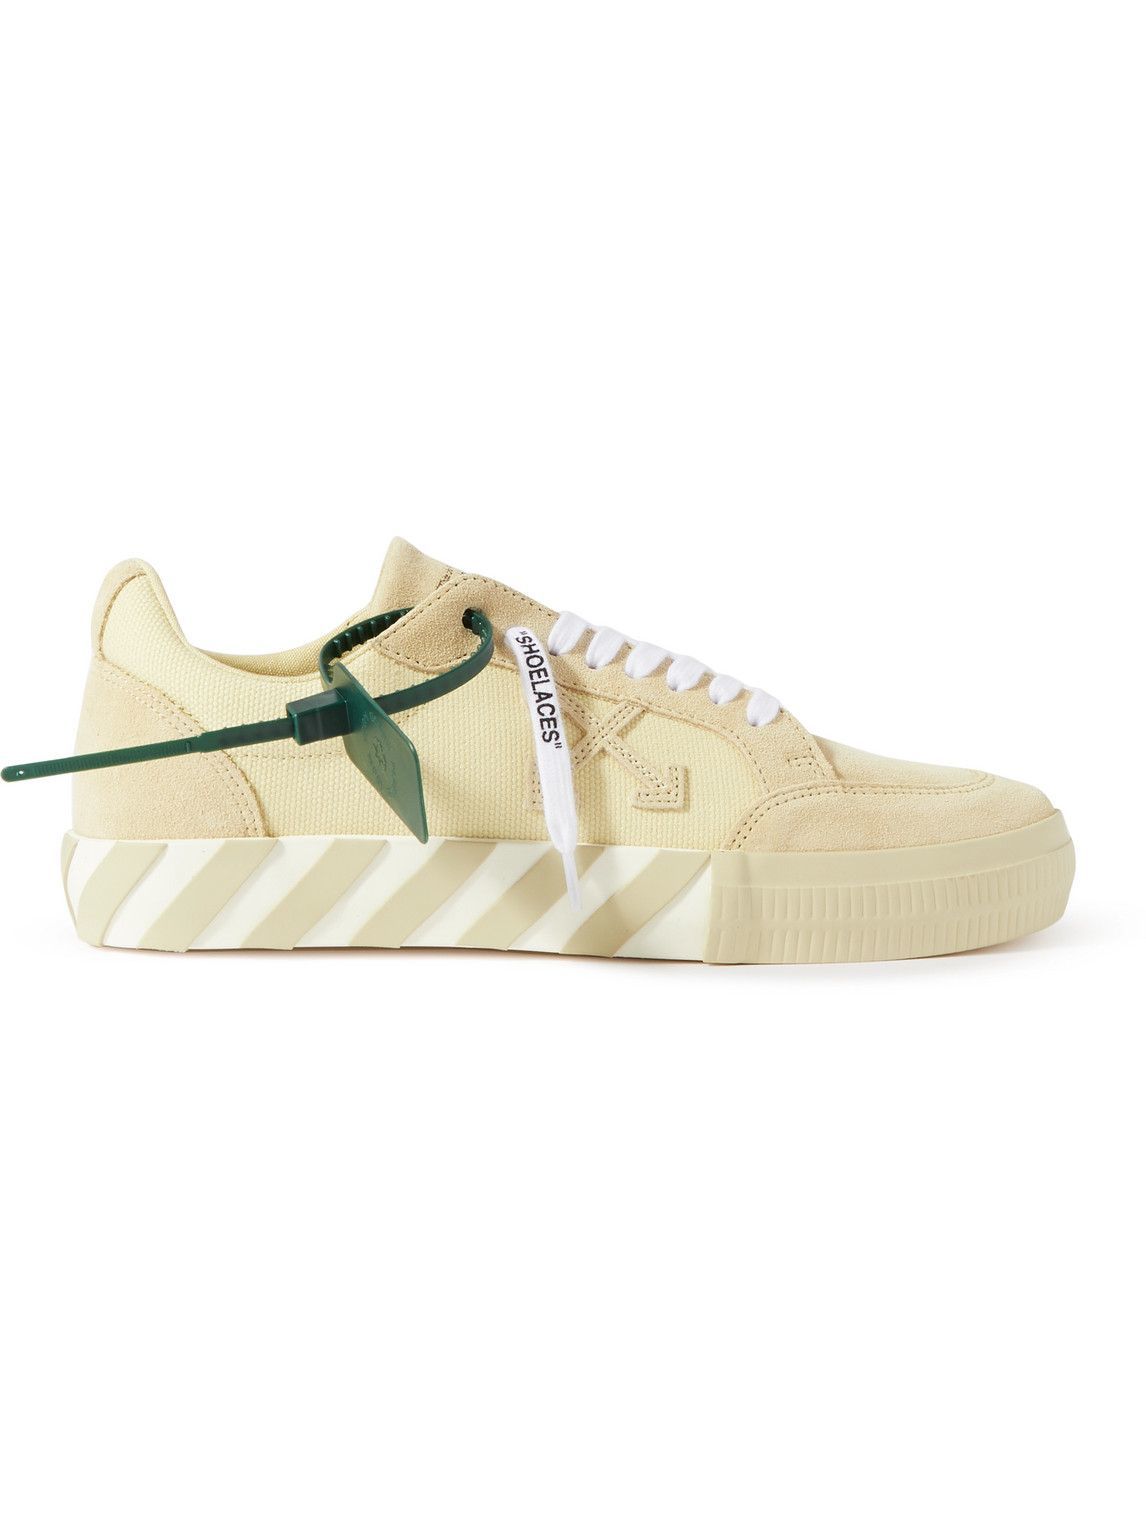 Off-White - Canvas and Suede Sneakers - Neutrals Off-White